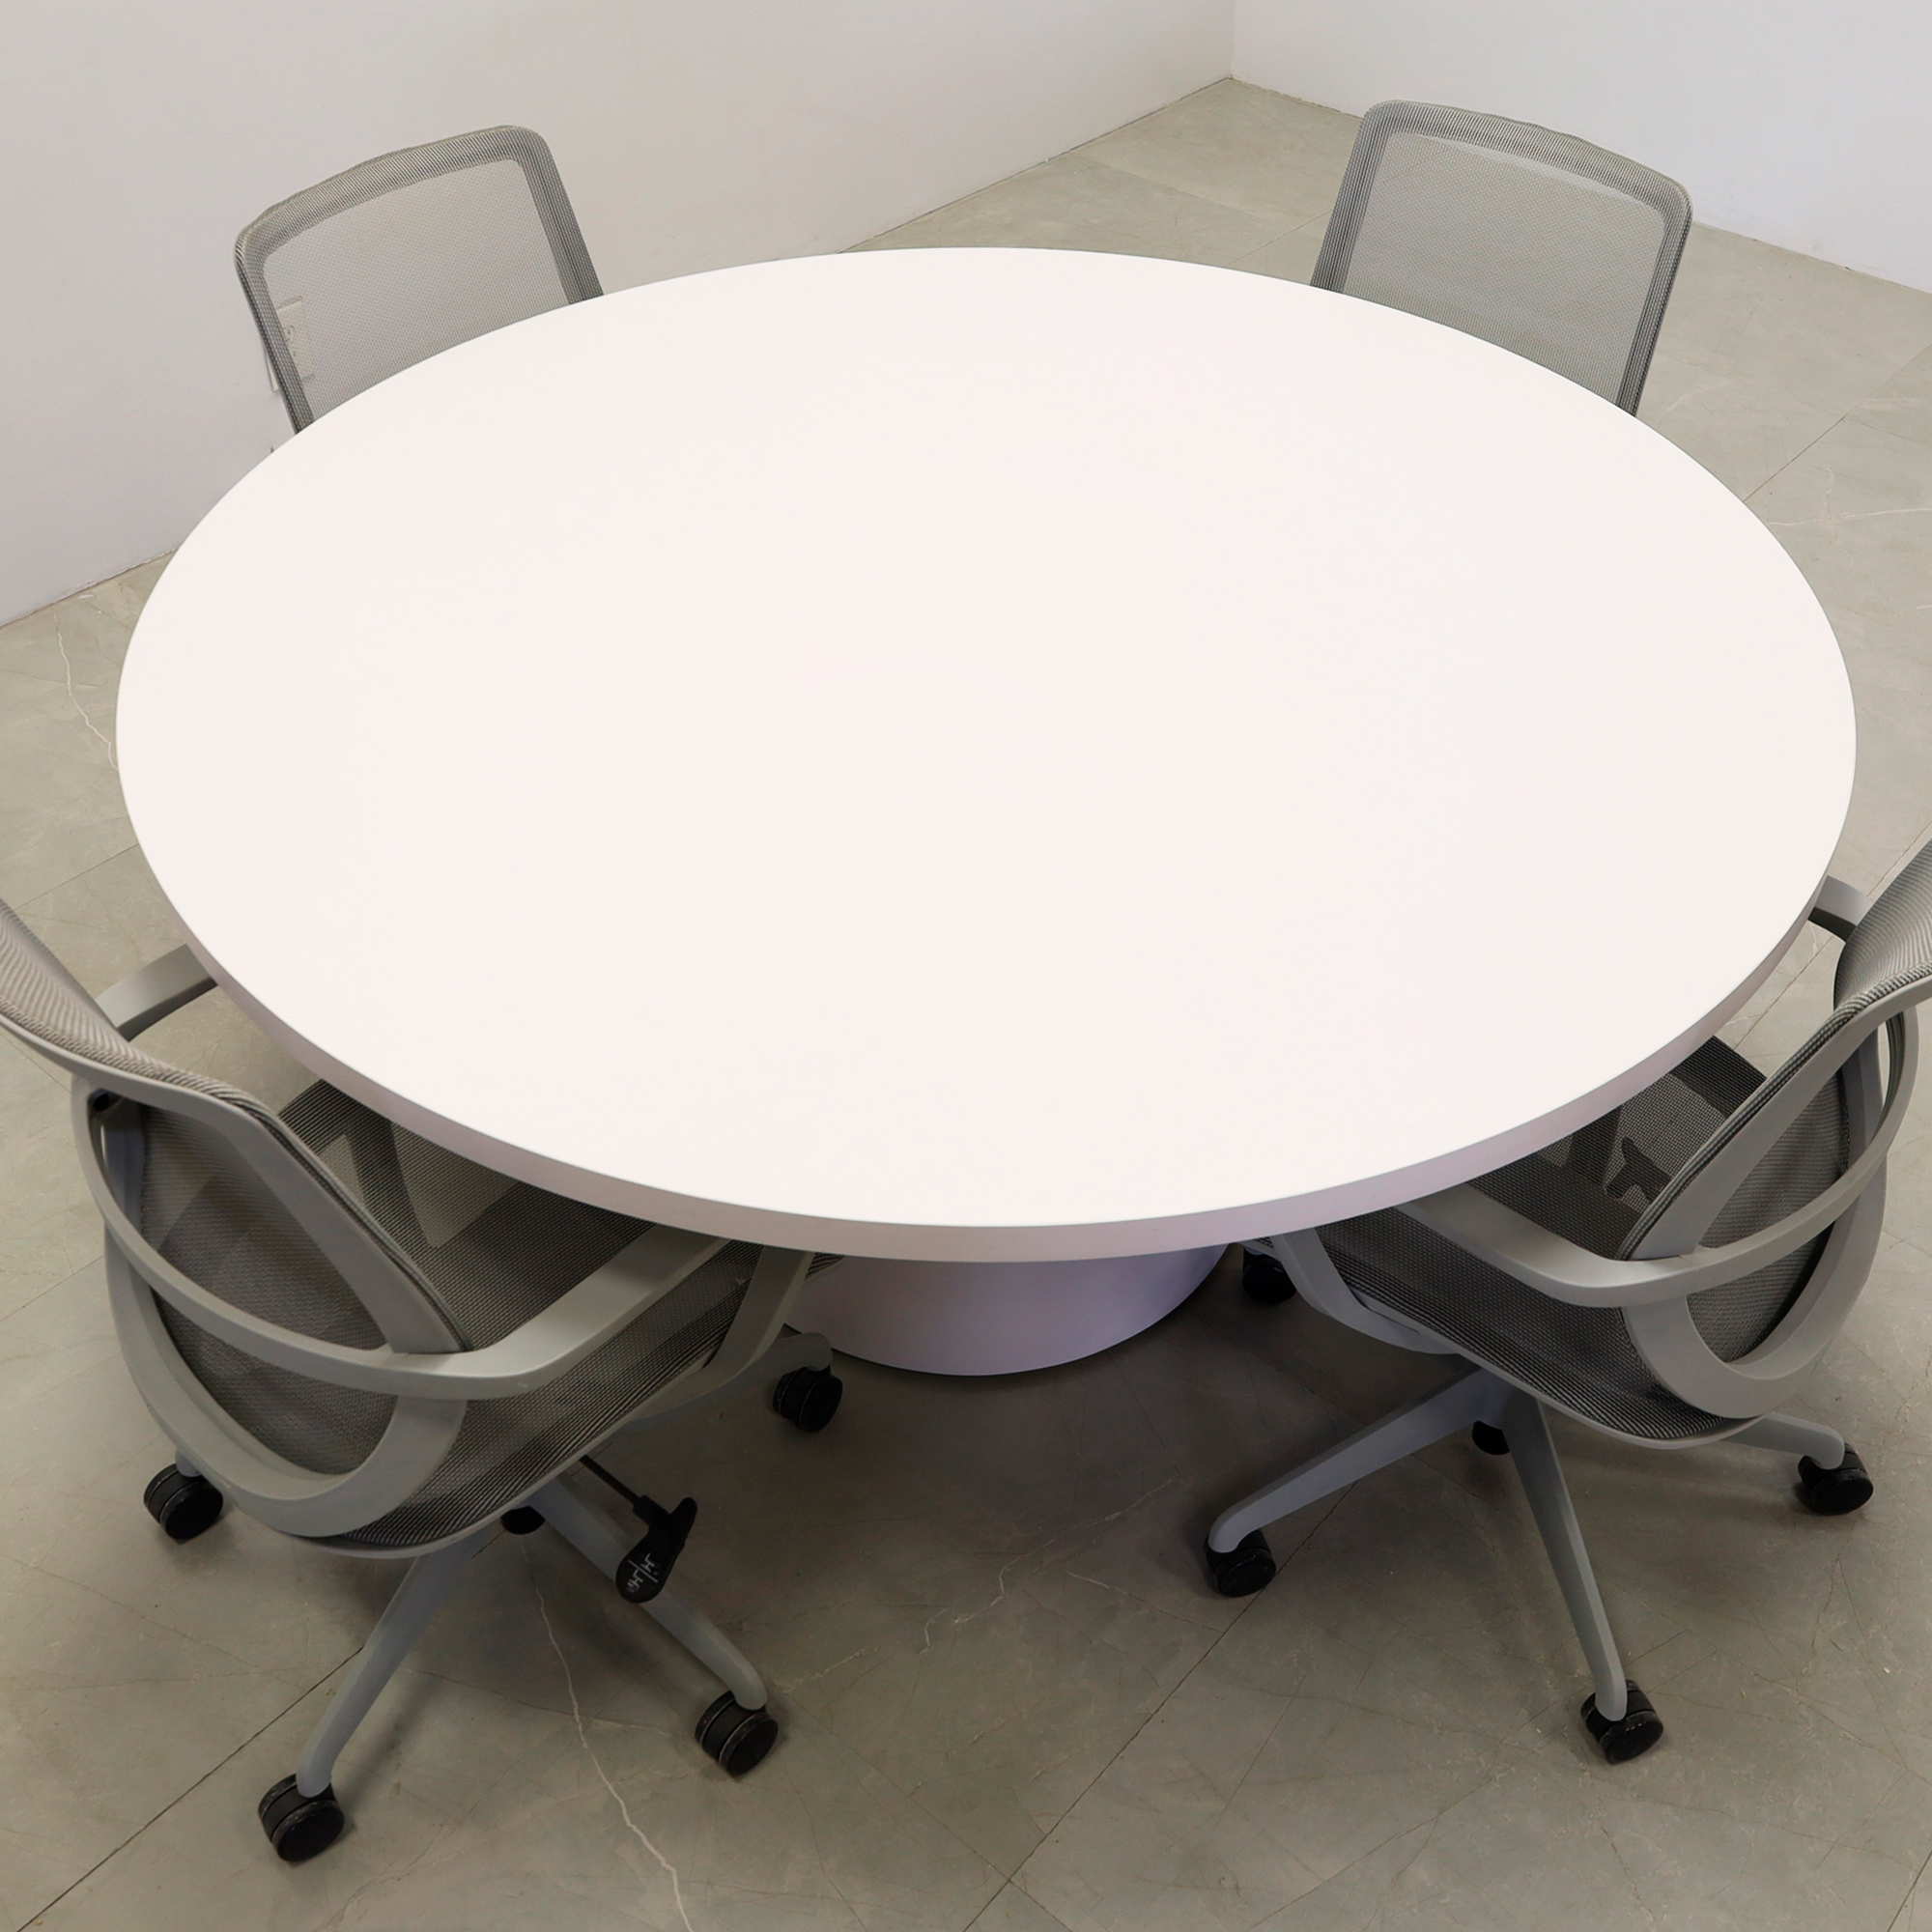 60-inch Newton Round Conference Table in white matte laminate top & base, shown here.